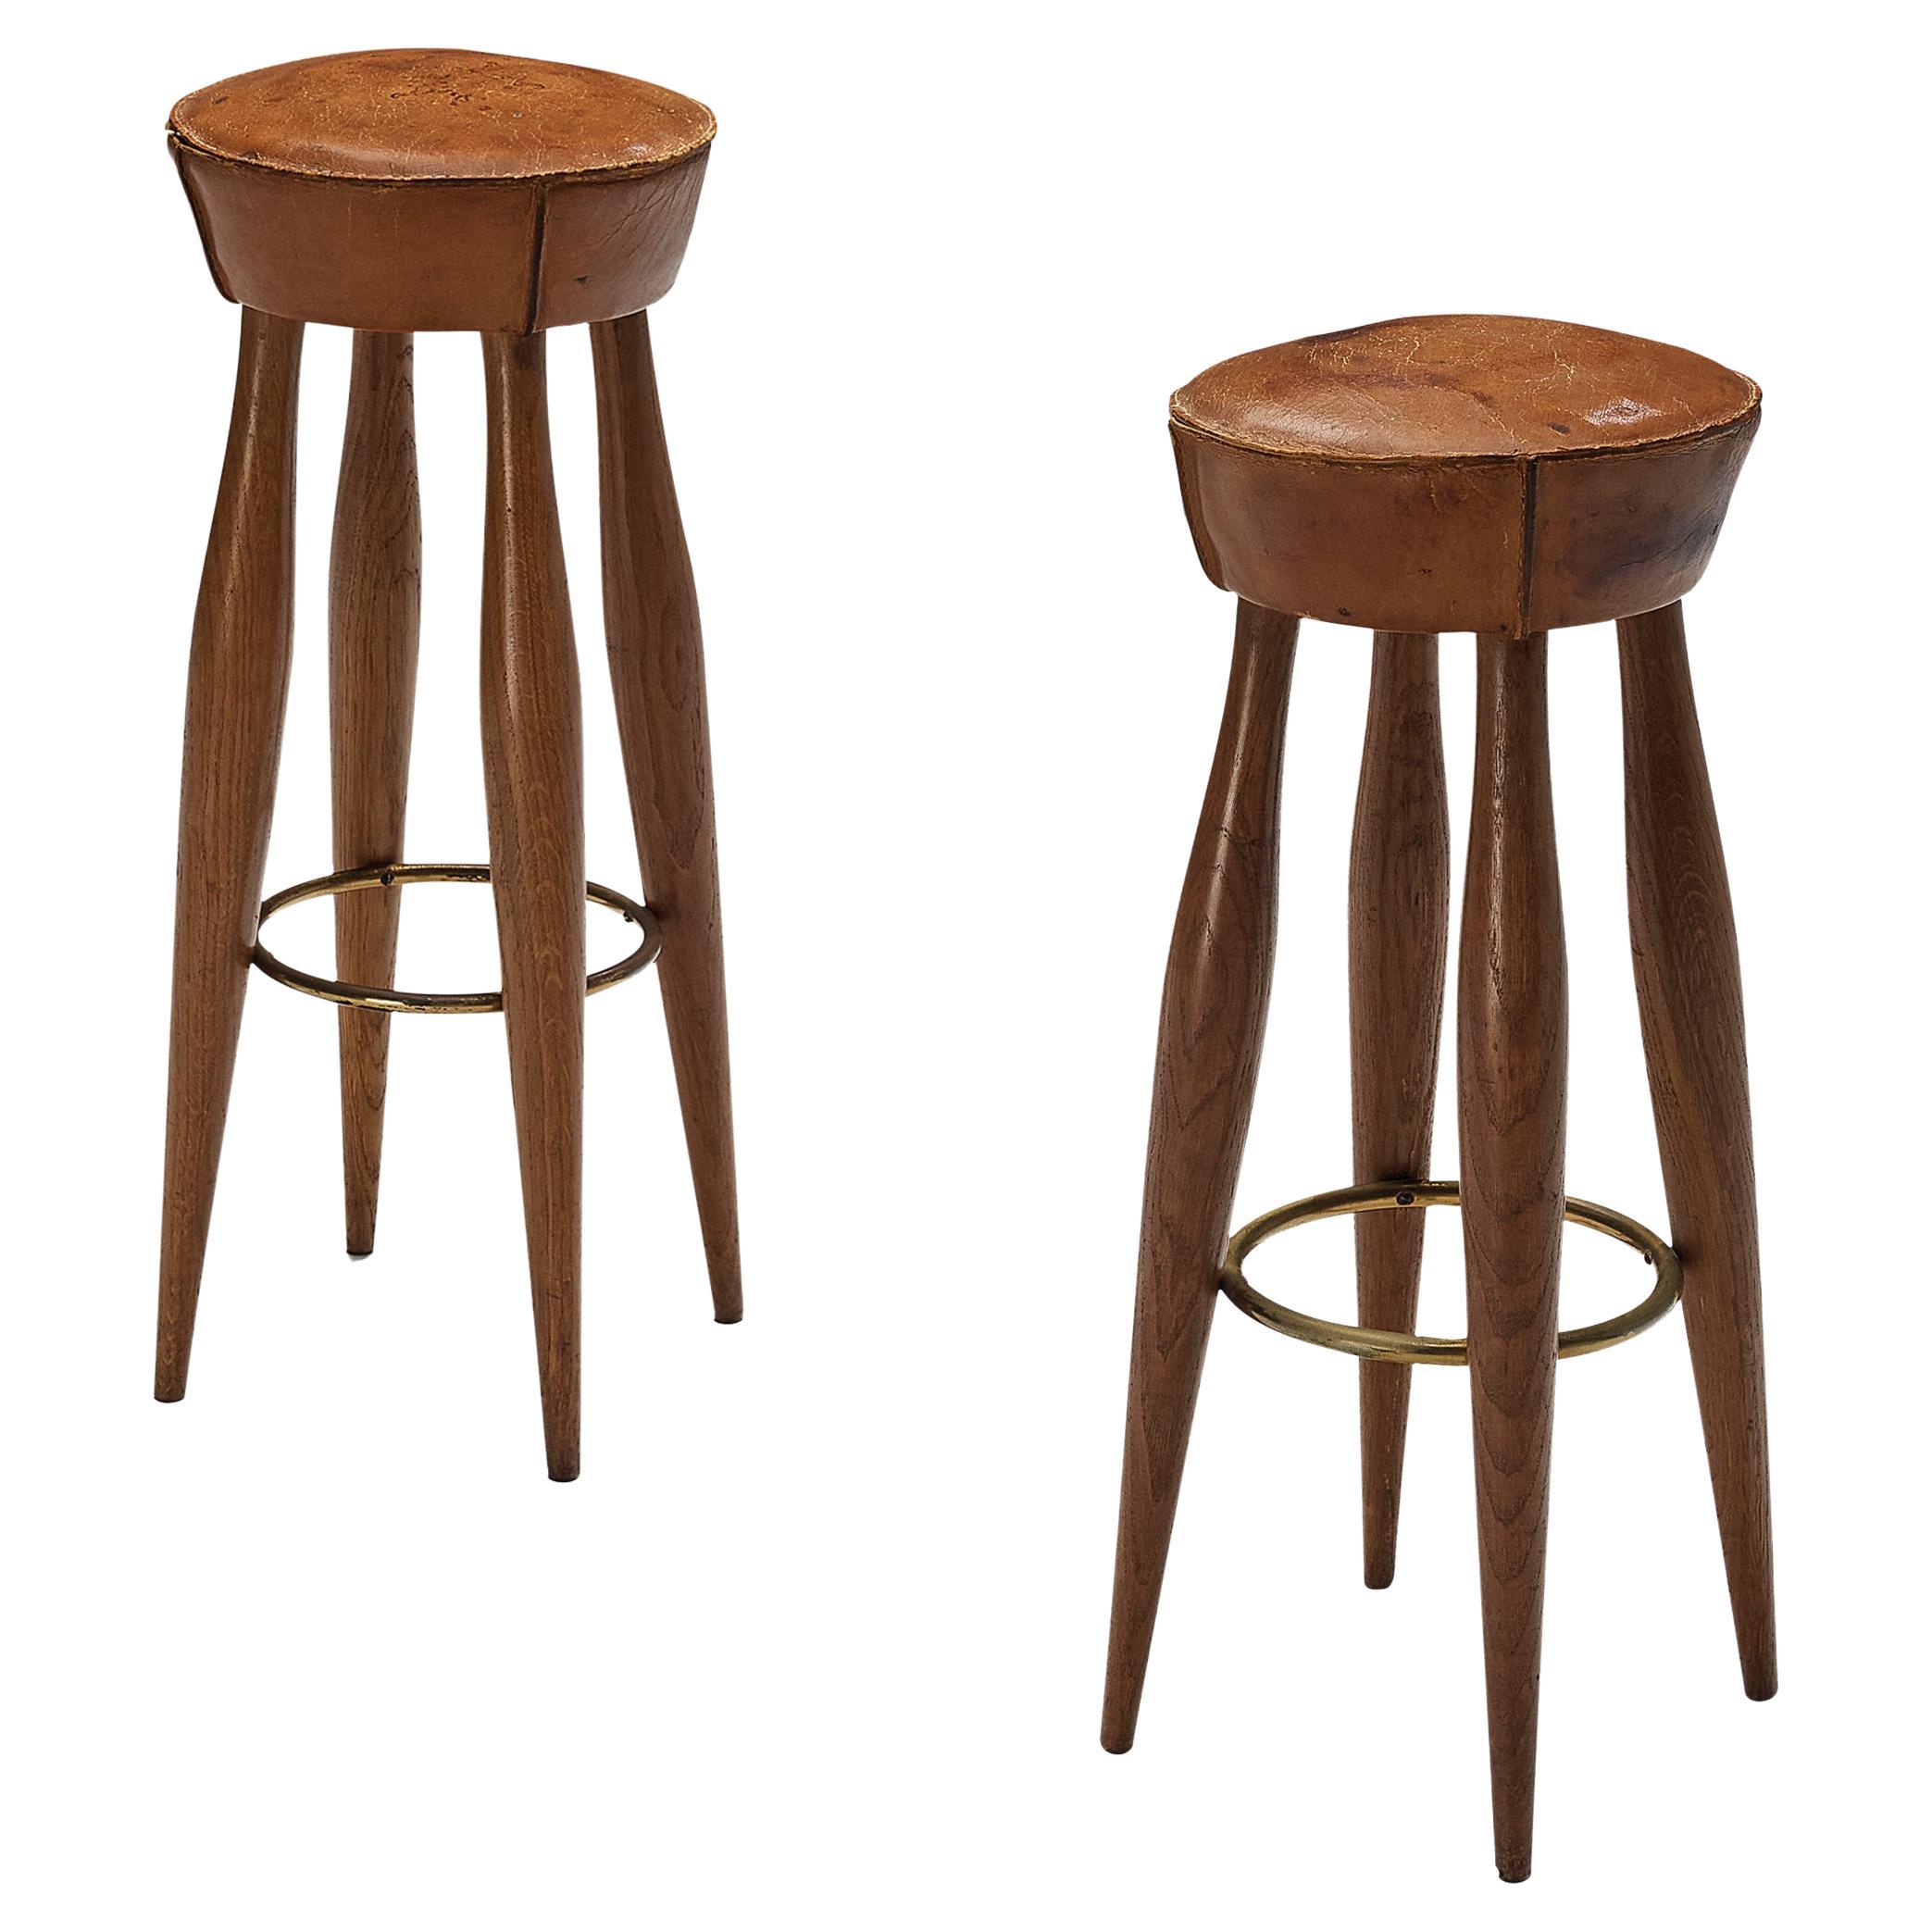 Italian Stools in Oak and Cognac Leather 